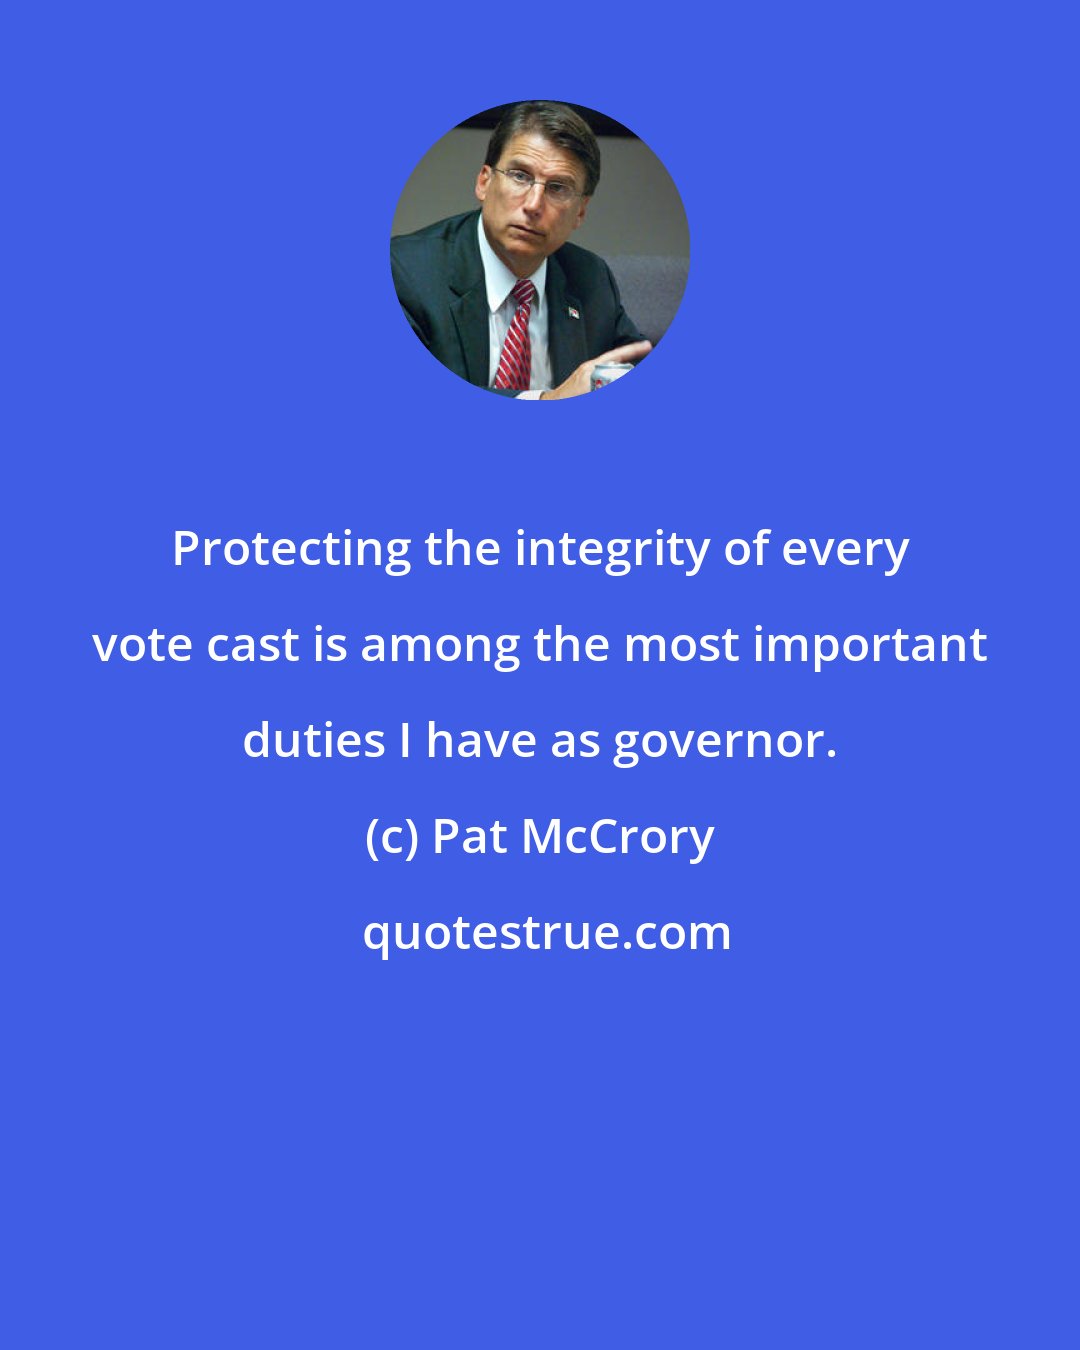 Pat McCrory: Protecting the integrity of every vote cast is among the most important duties I have as governor.